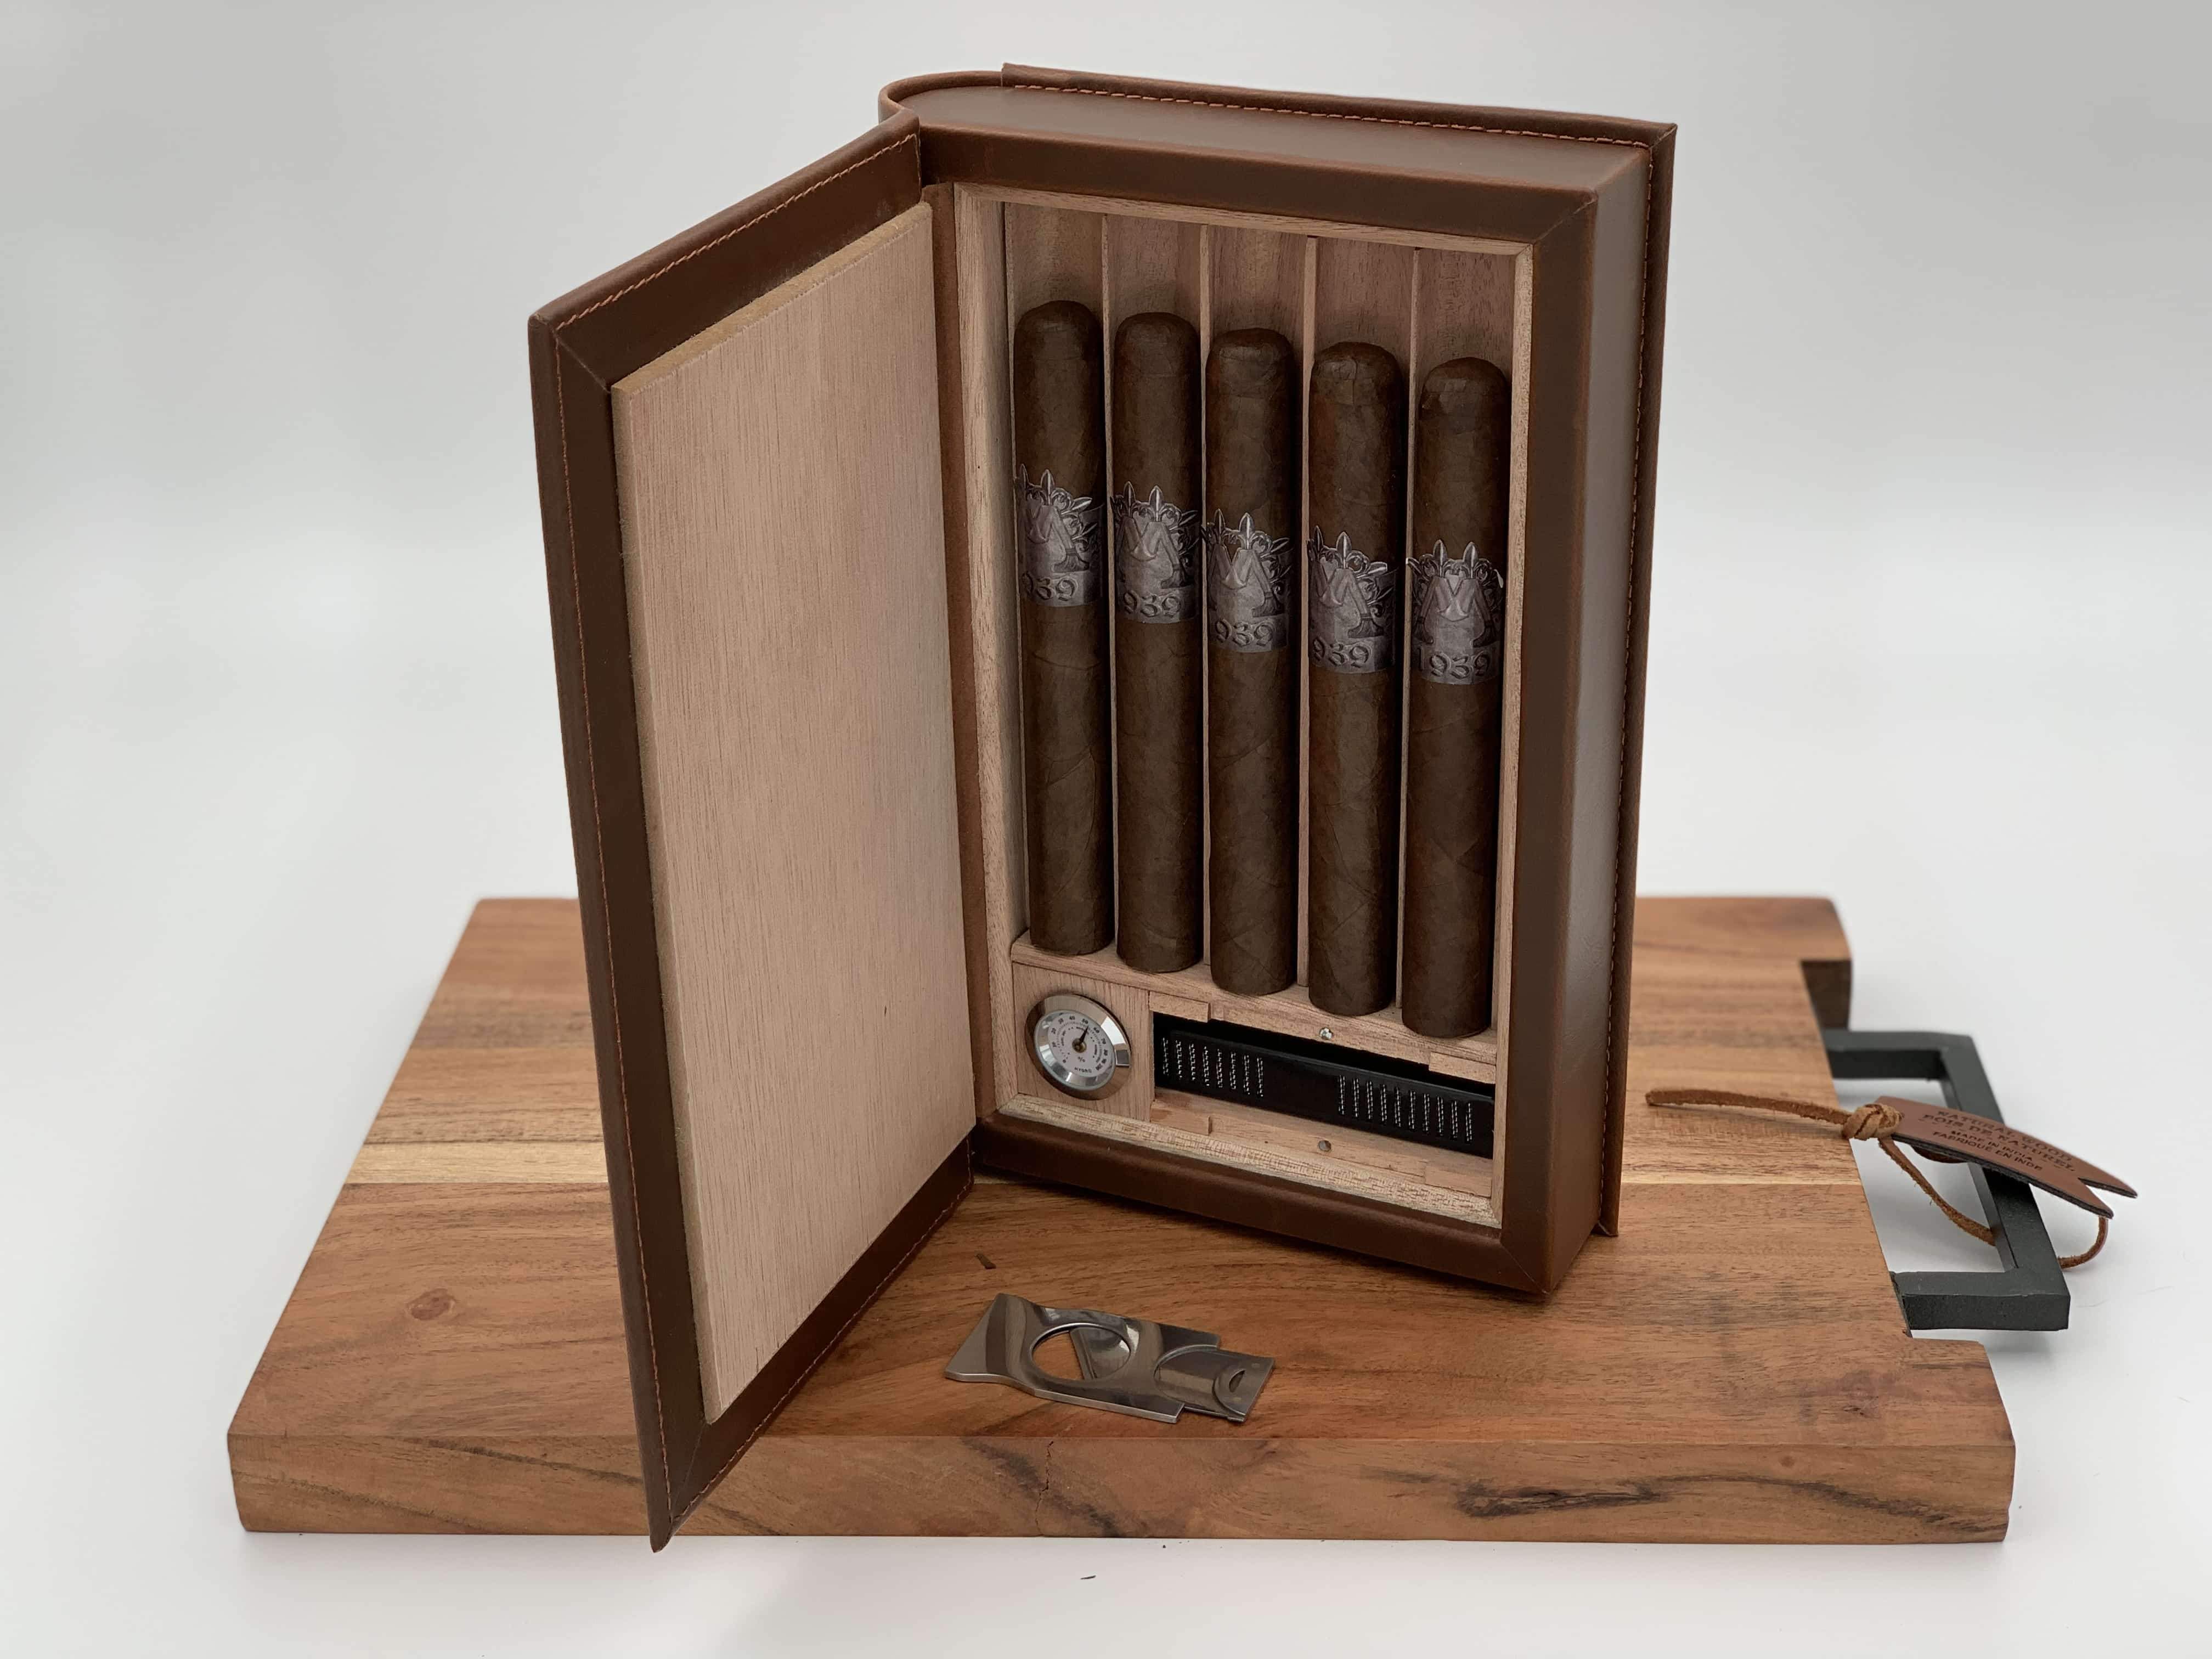 Montero 1939 - Leather Humidor Book With (5) Cigars And Cigar Cutter